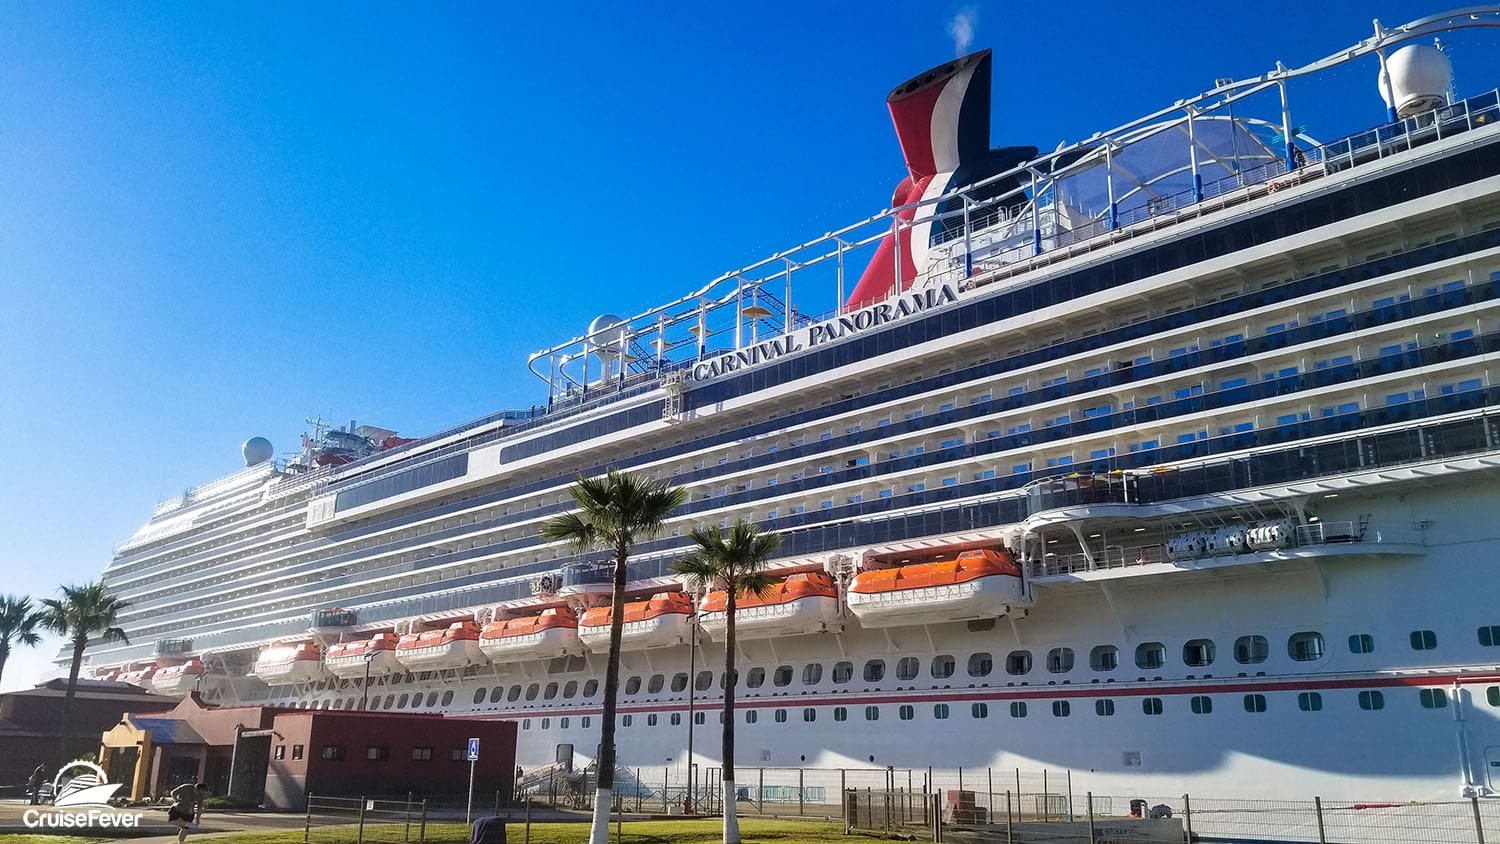 List of Carnival Cruise Ships Newest to Oldest